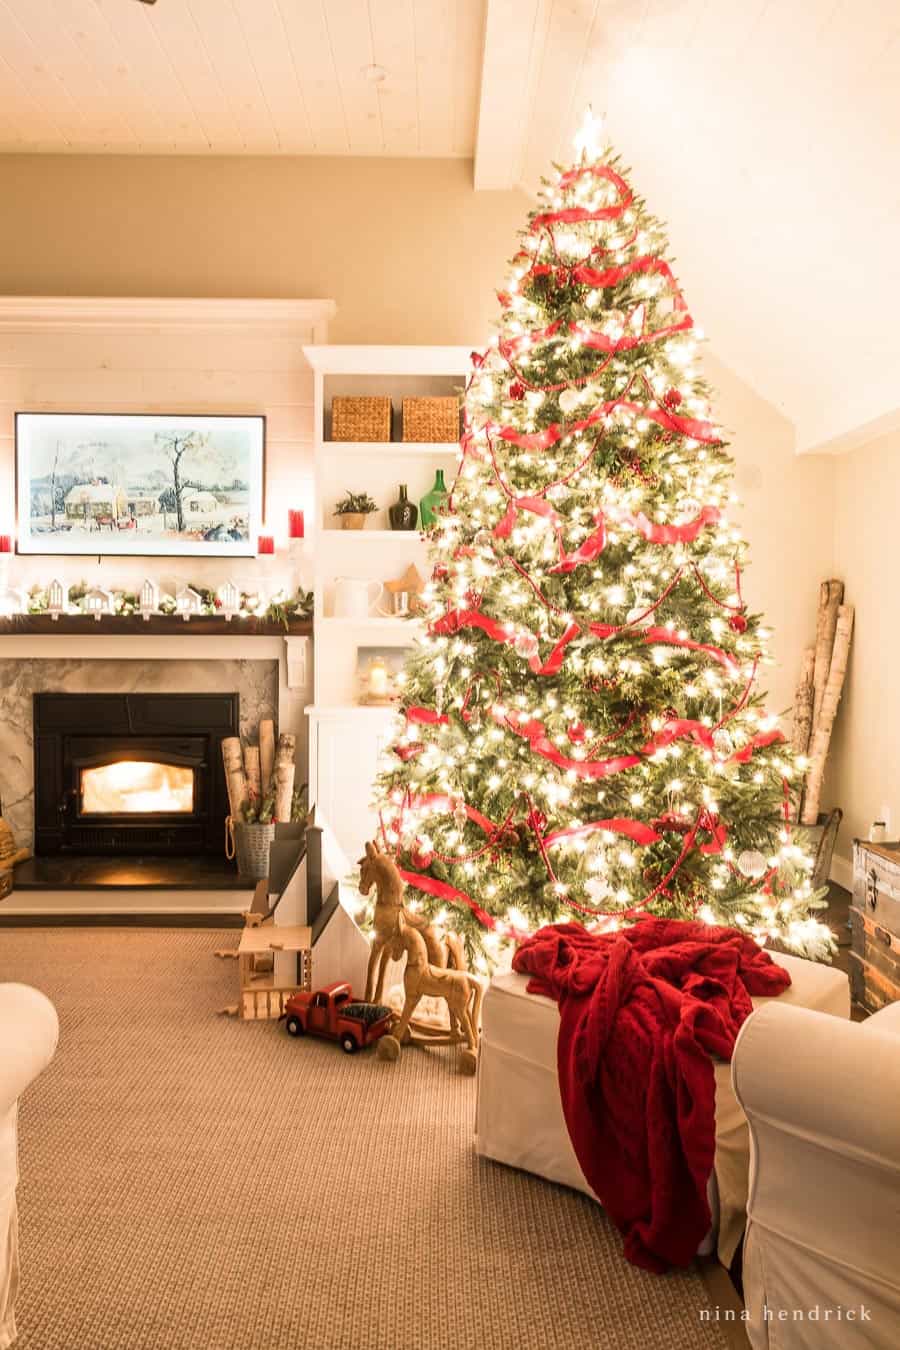 Cozy chair in front of Christmas lights in nighttime family room with fireplace